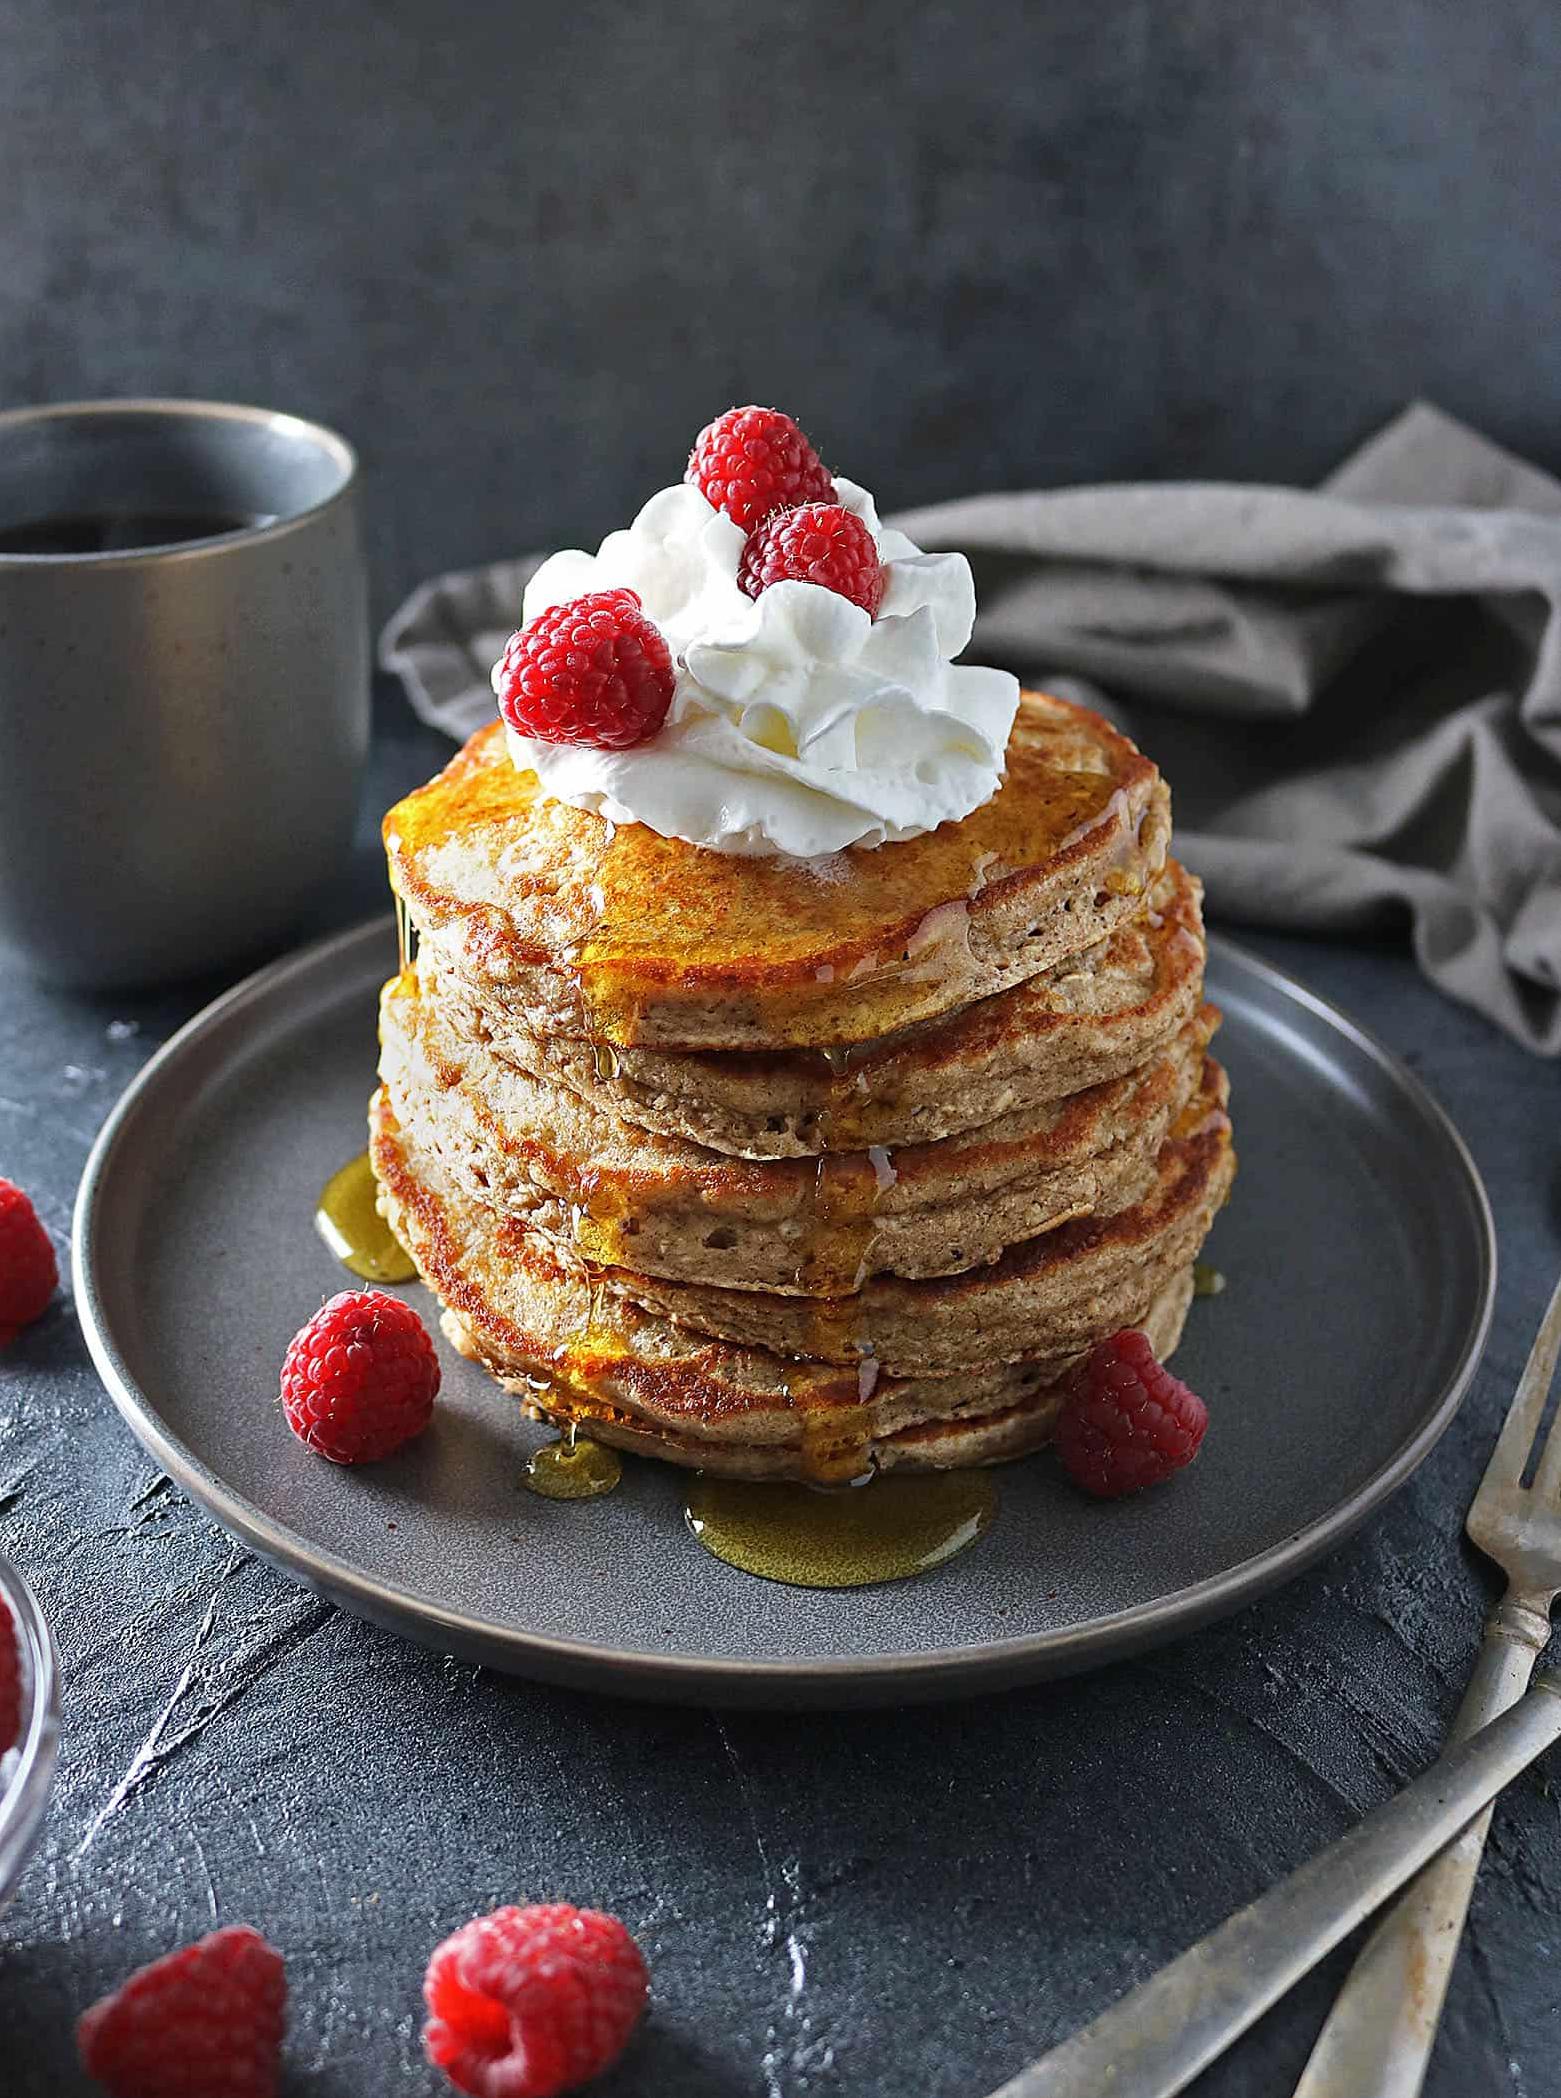  These gluten-free oatmeal pancakes will make your morning routine a breeze.